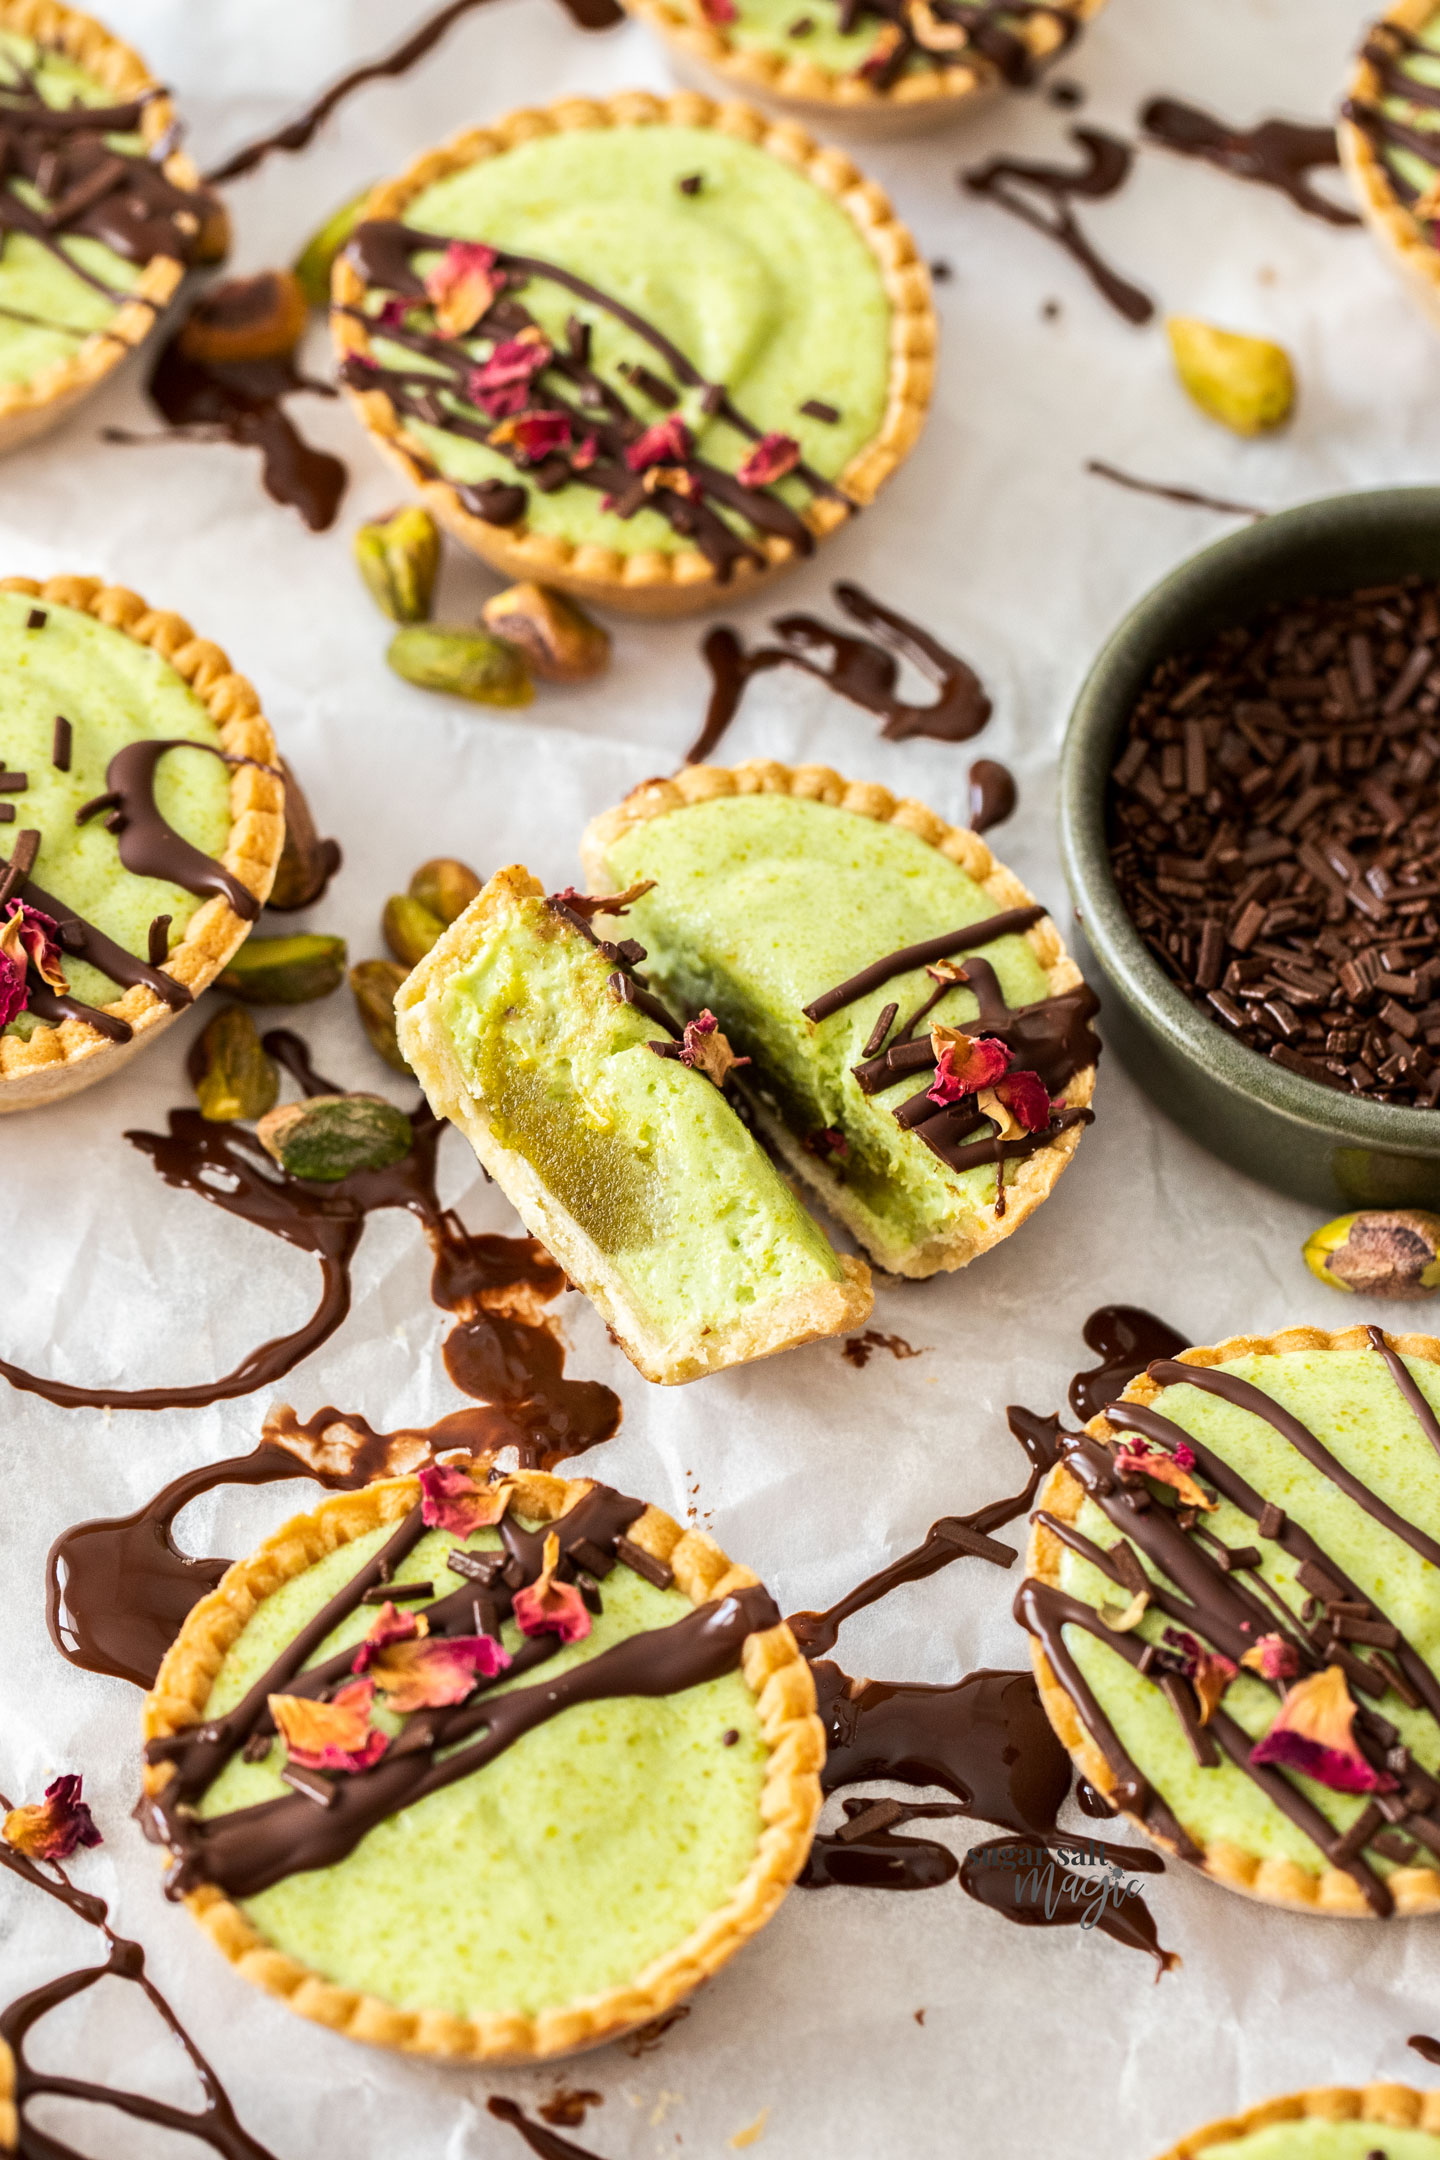 A pistachio tartlet chopped in half to show the filling inside.